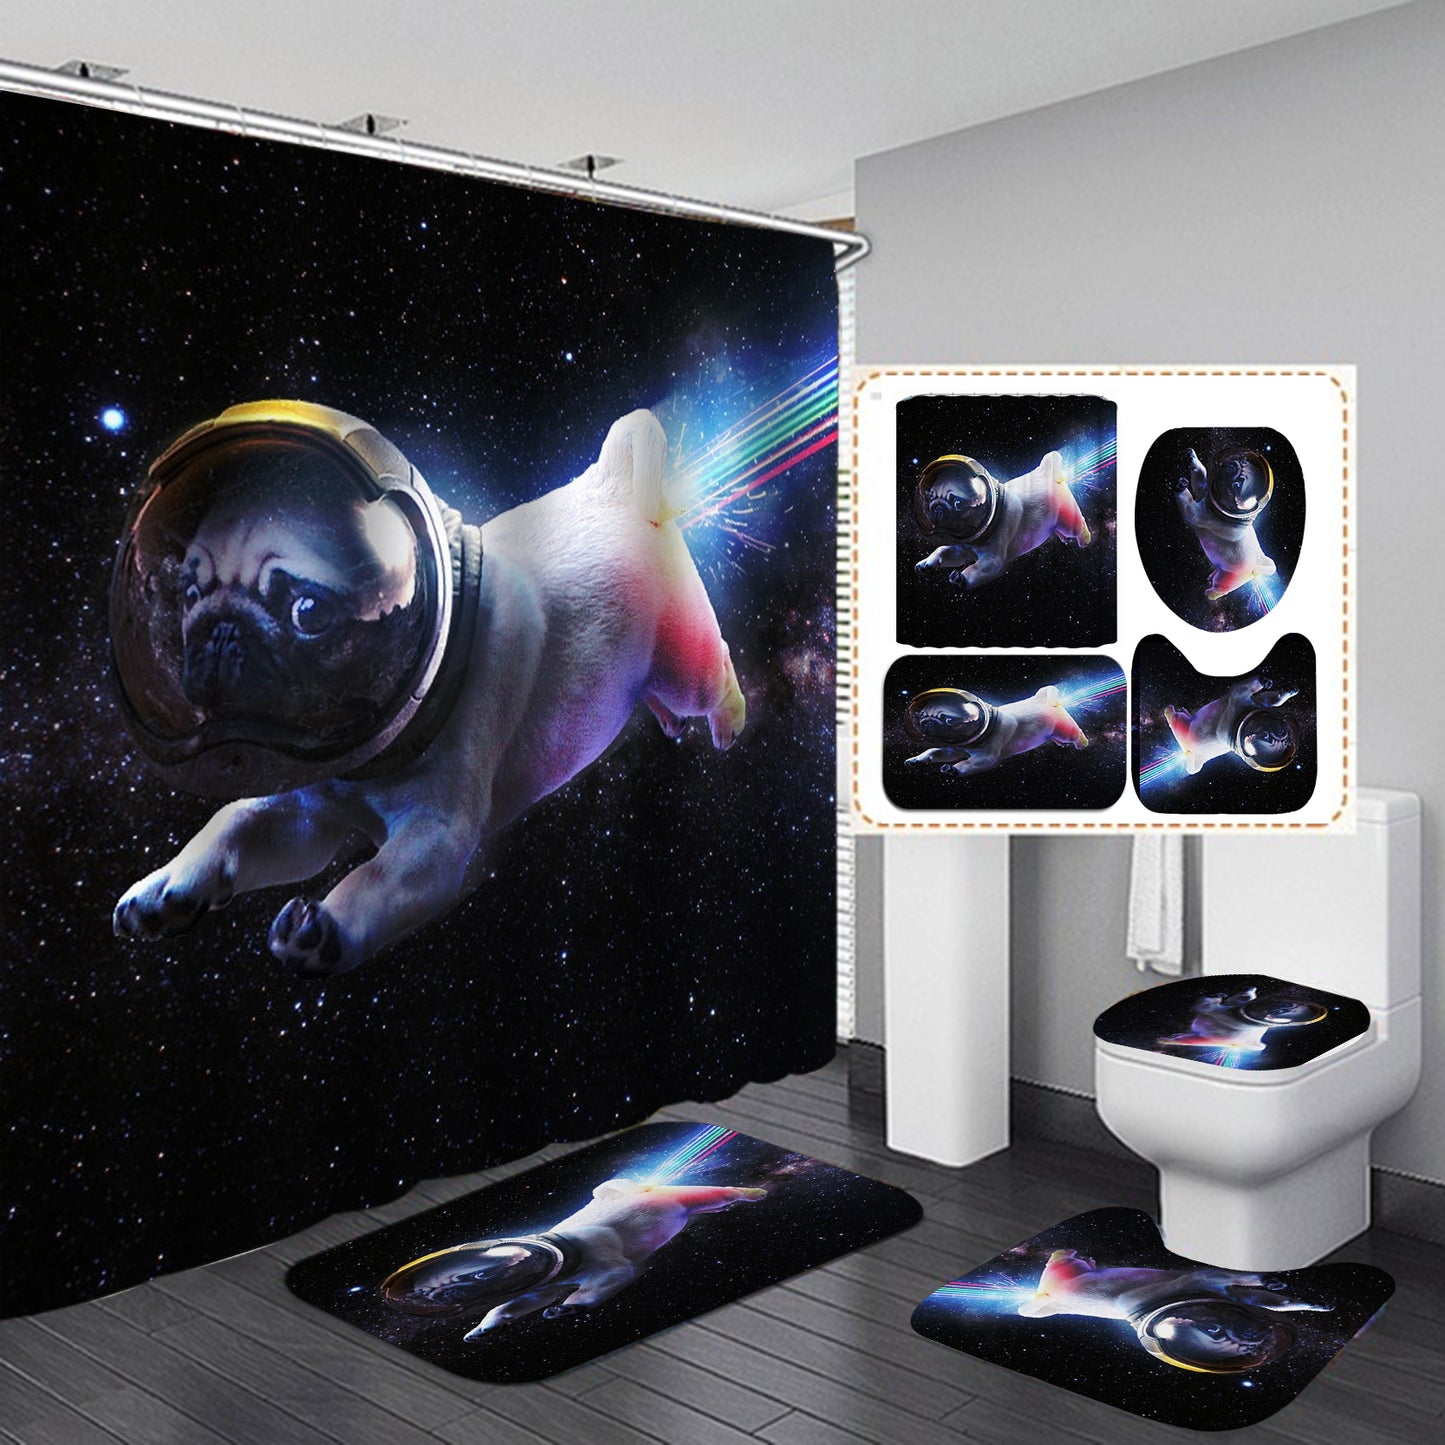 Funny Design Pug Flying at Space Shower Curtain Set - 4 Pcs